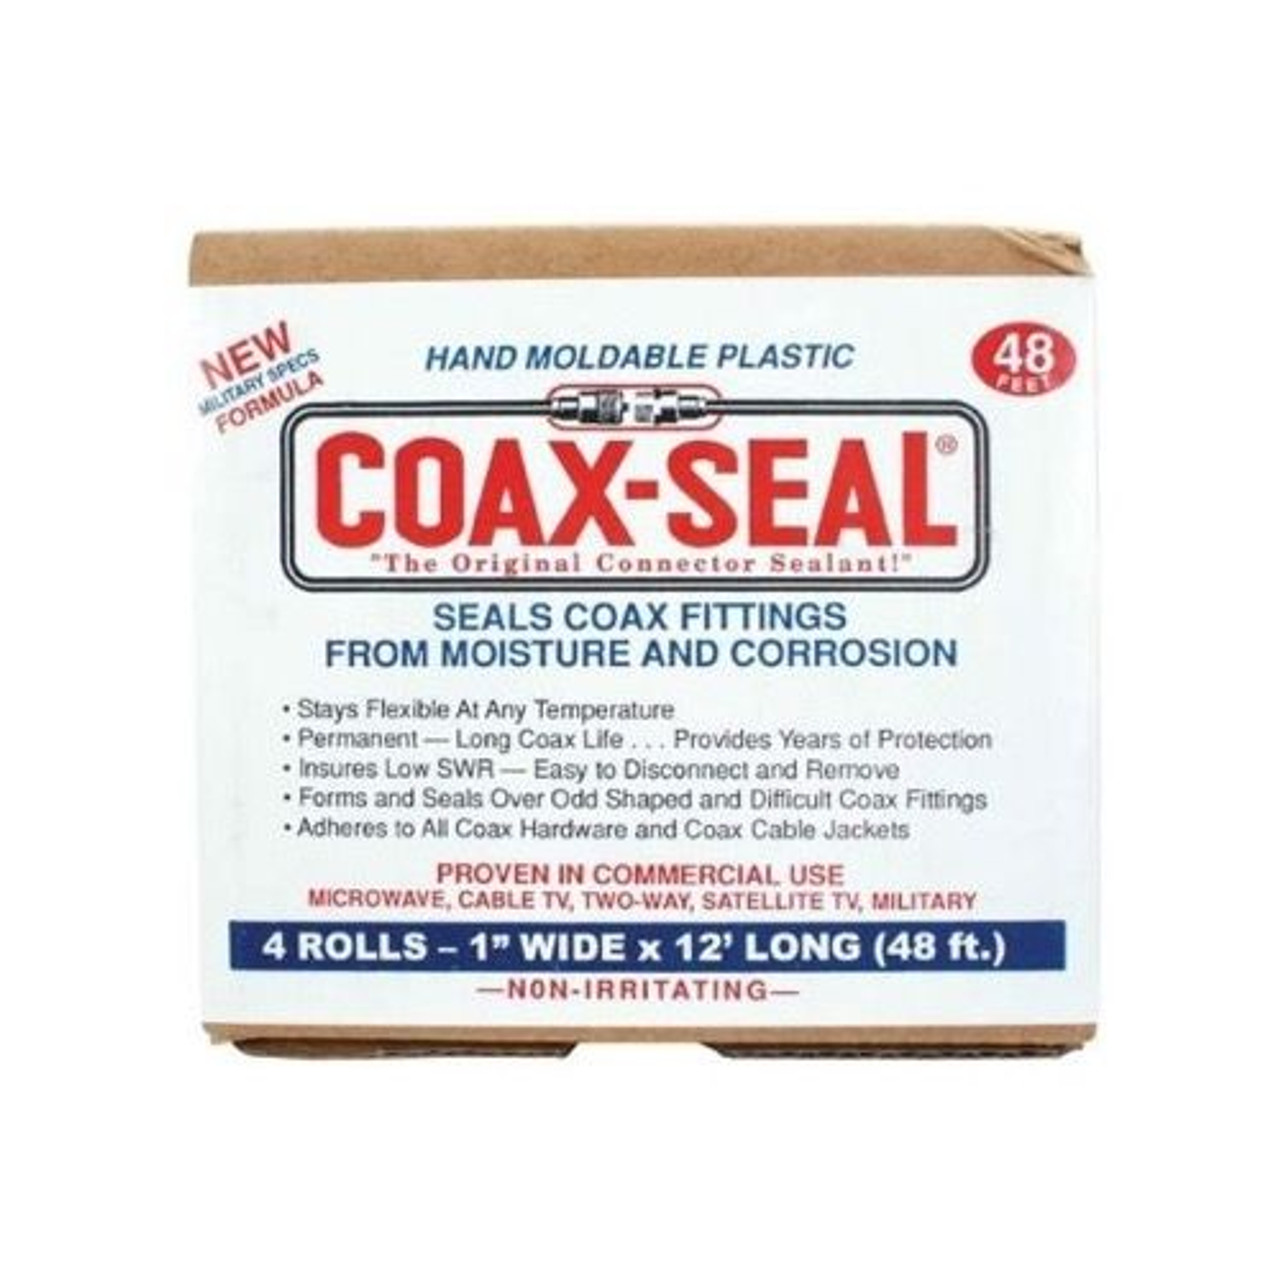 Coax-Seal 106 4 Pack 1" Inch x 12' Ft Rolls Hand Moldable Black Mastic 3/32" Thick Commercial Pack Bulk Tape Coax Sealant Tape for Fittings Universal Waterproof Non-Conducting Roll Wire Wrap